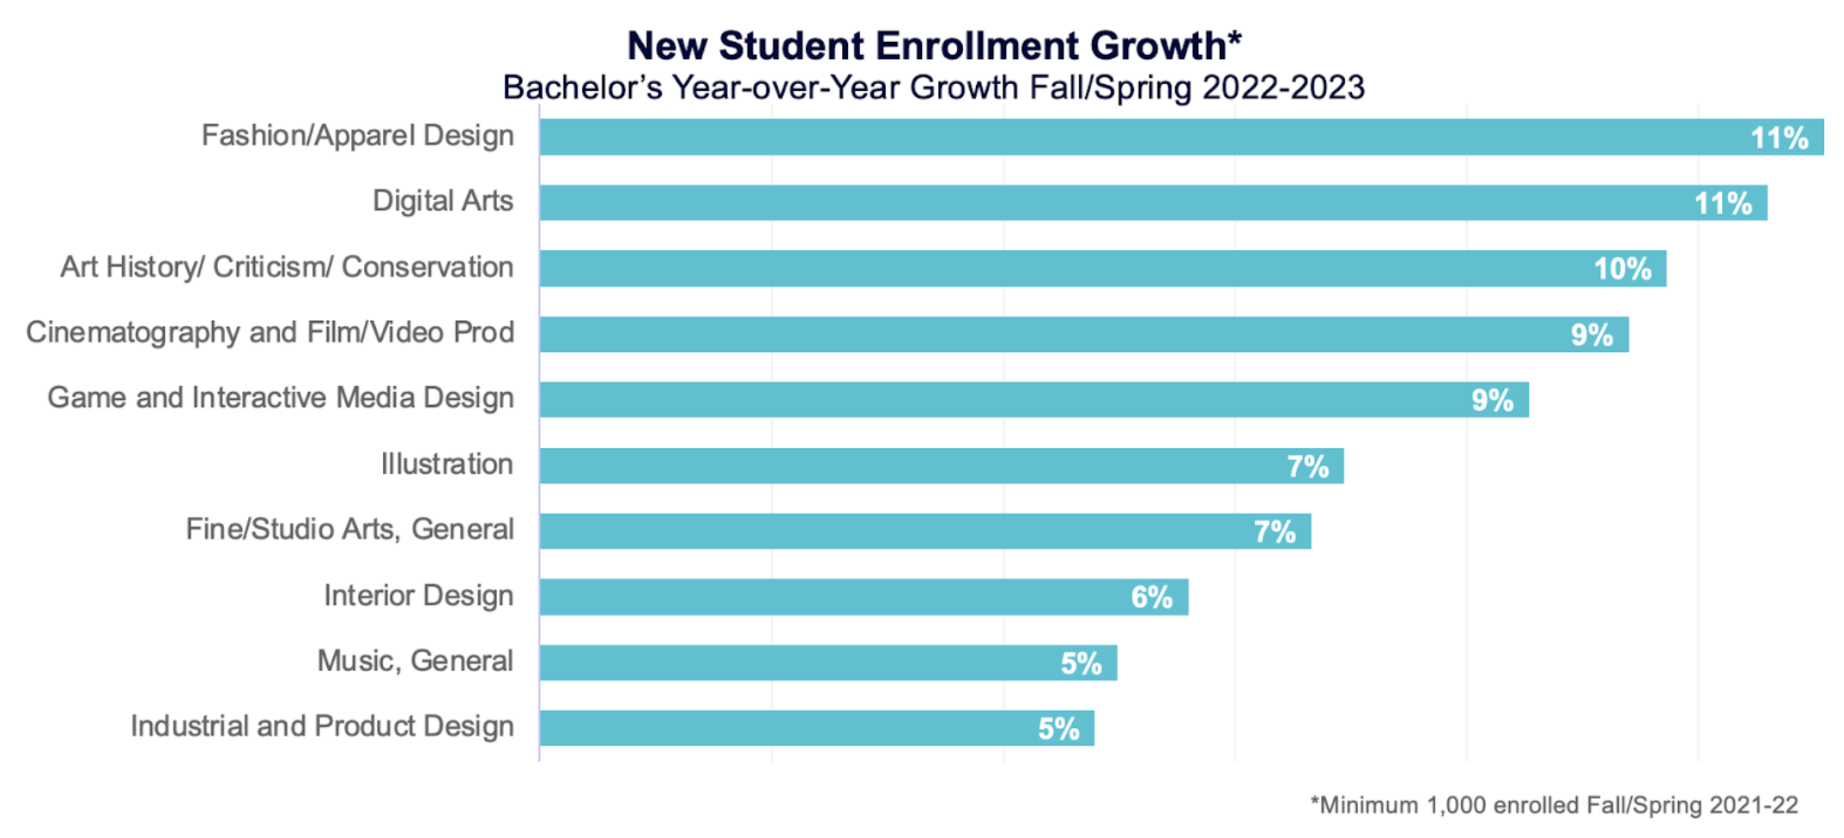 New Student Enrollment Growth* Bachelor's Year-Over-Year Growth Fall/Spring 2022-2023